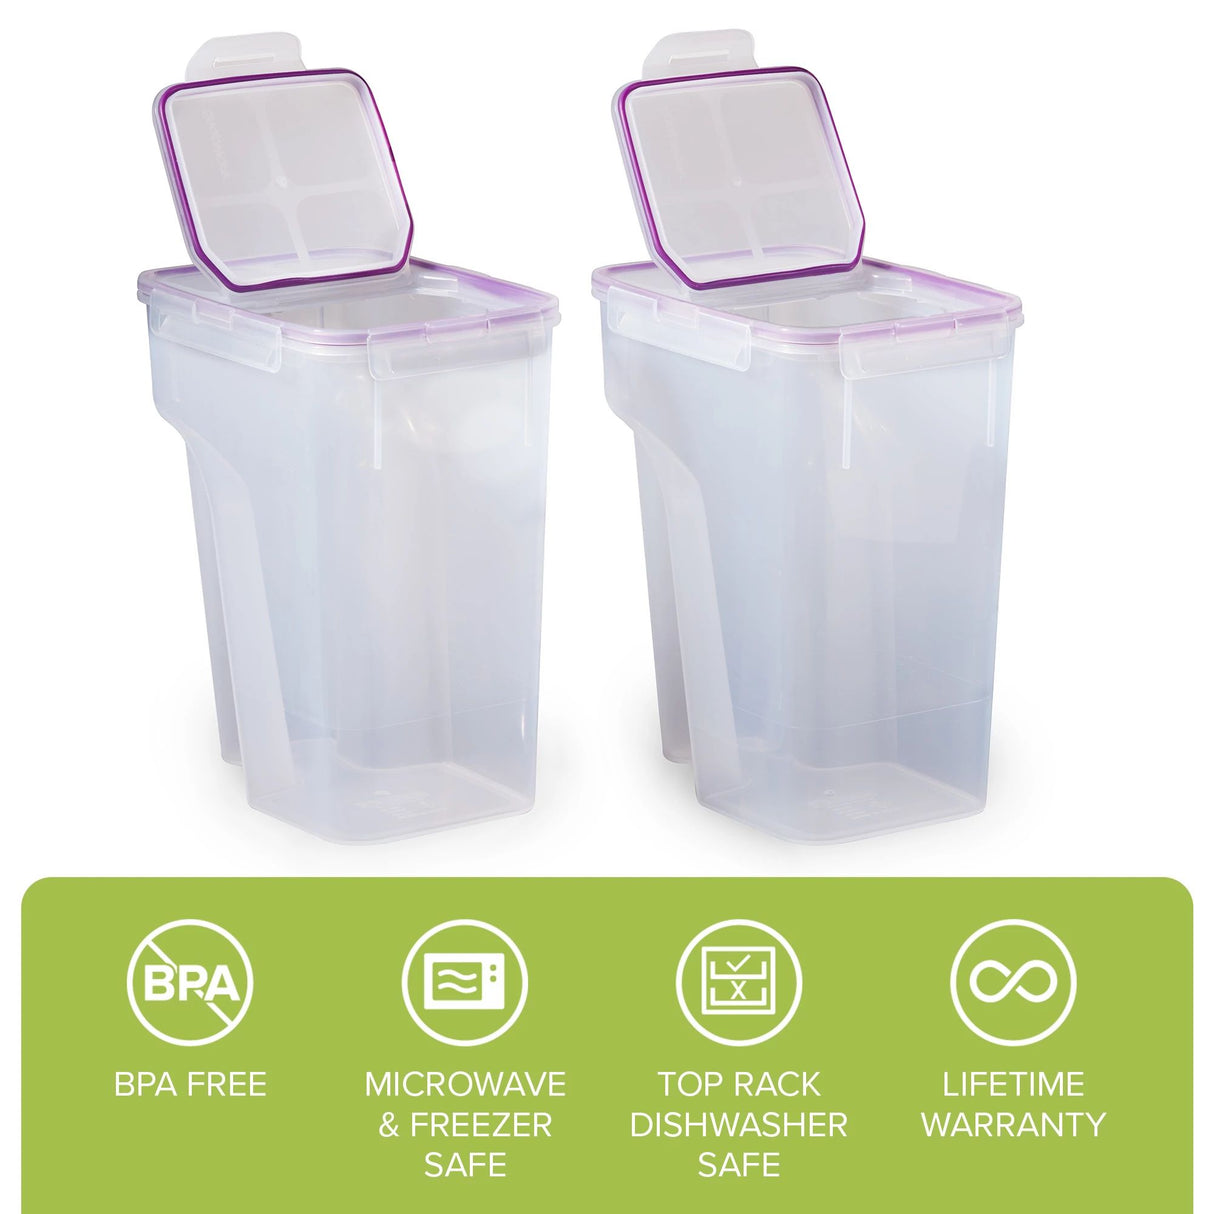  Airtight 22.8-cup Plastic Storage Container, 2-pack with text BPA Free microwave/freezer safe dishwasher safe lifetime warranty 